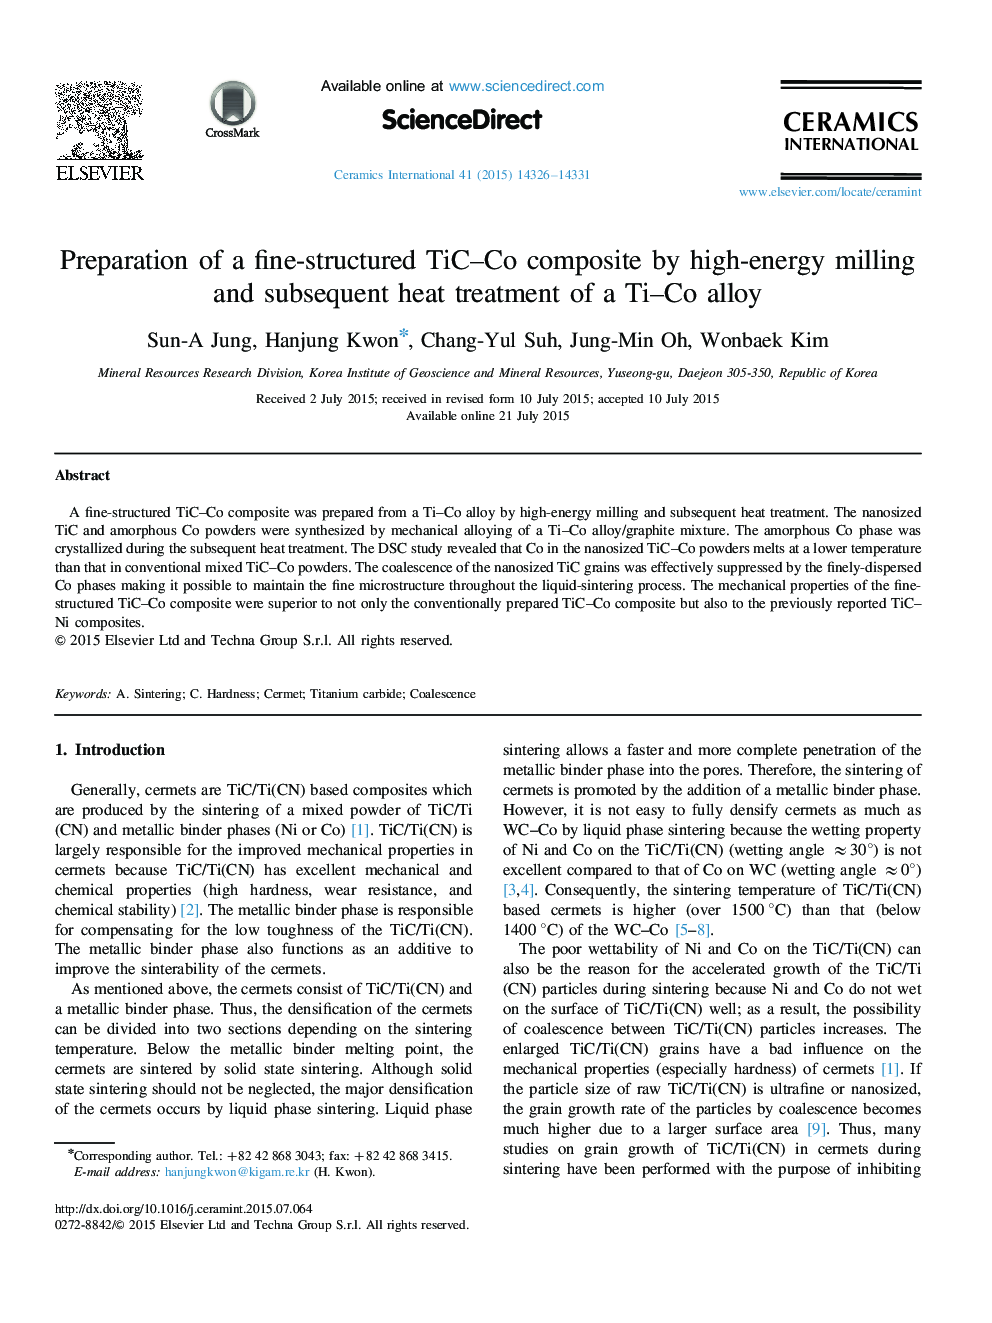 Preparation of a fine-structured TiC–Co composite by high-energy milling and subsequent heat treatment of a Ti–Co alloy